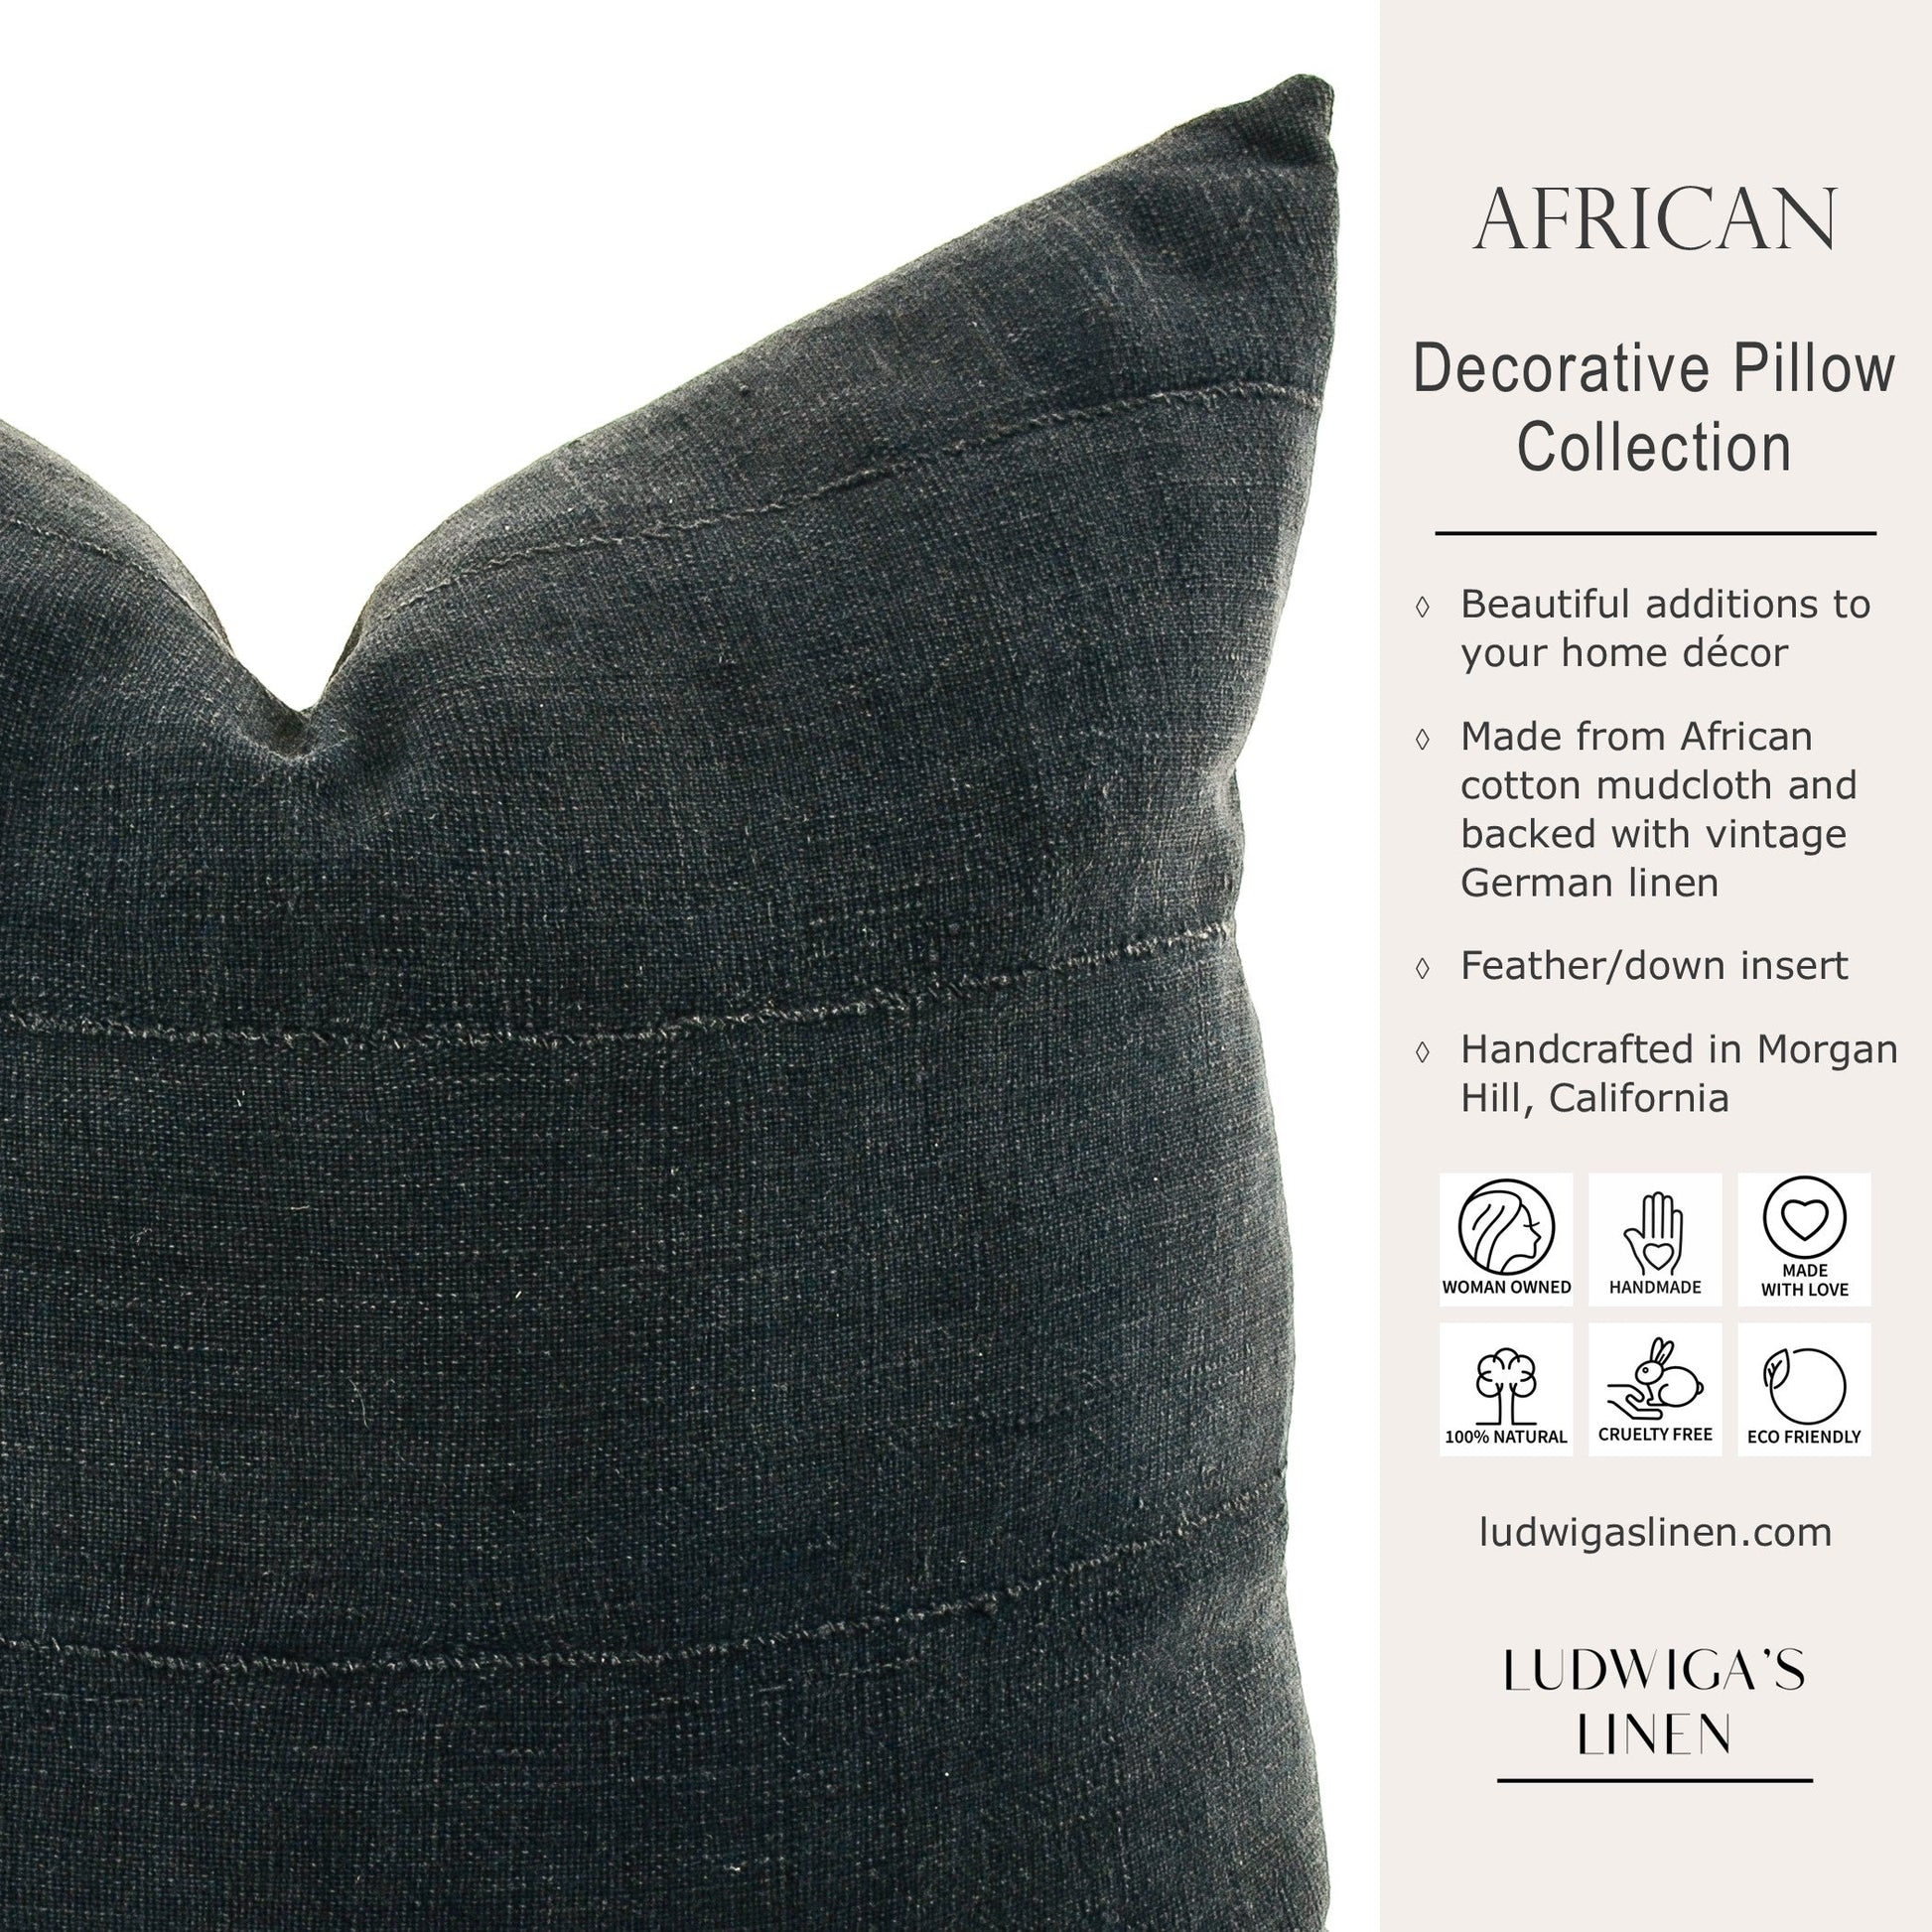 Information about Ludwiga's Linen African pillow collection